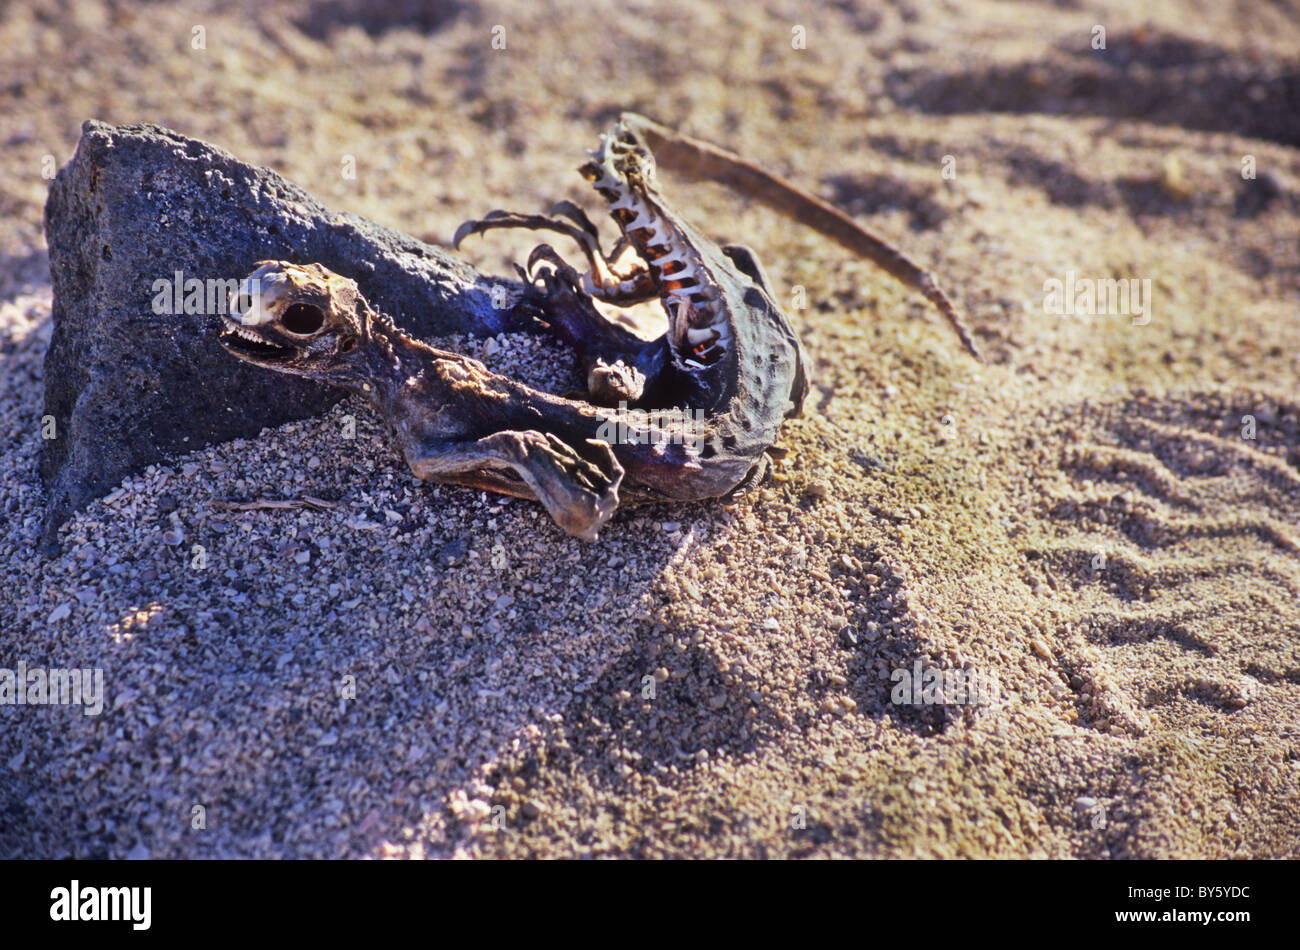 Skeletal remains of a Marine Iguana. Amazing sights and scenery in the Galapagos Islands Stock Photo